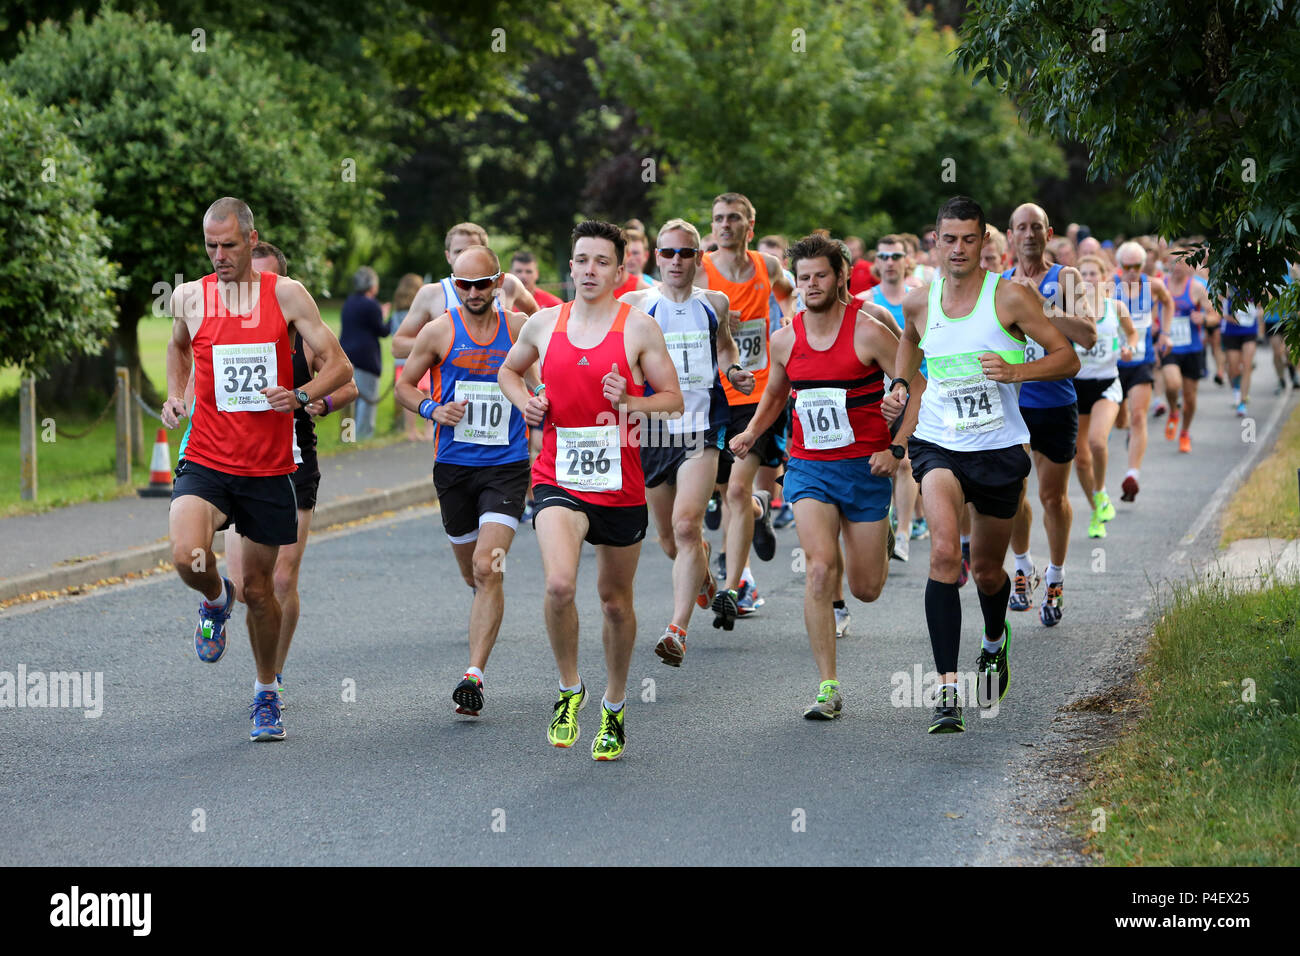 The Chichester Runners Club Mid Summer 5 Road Race which starts in Lavant and runs through Goodwood Racecourse, West Sussex, UK. Stock Photo